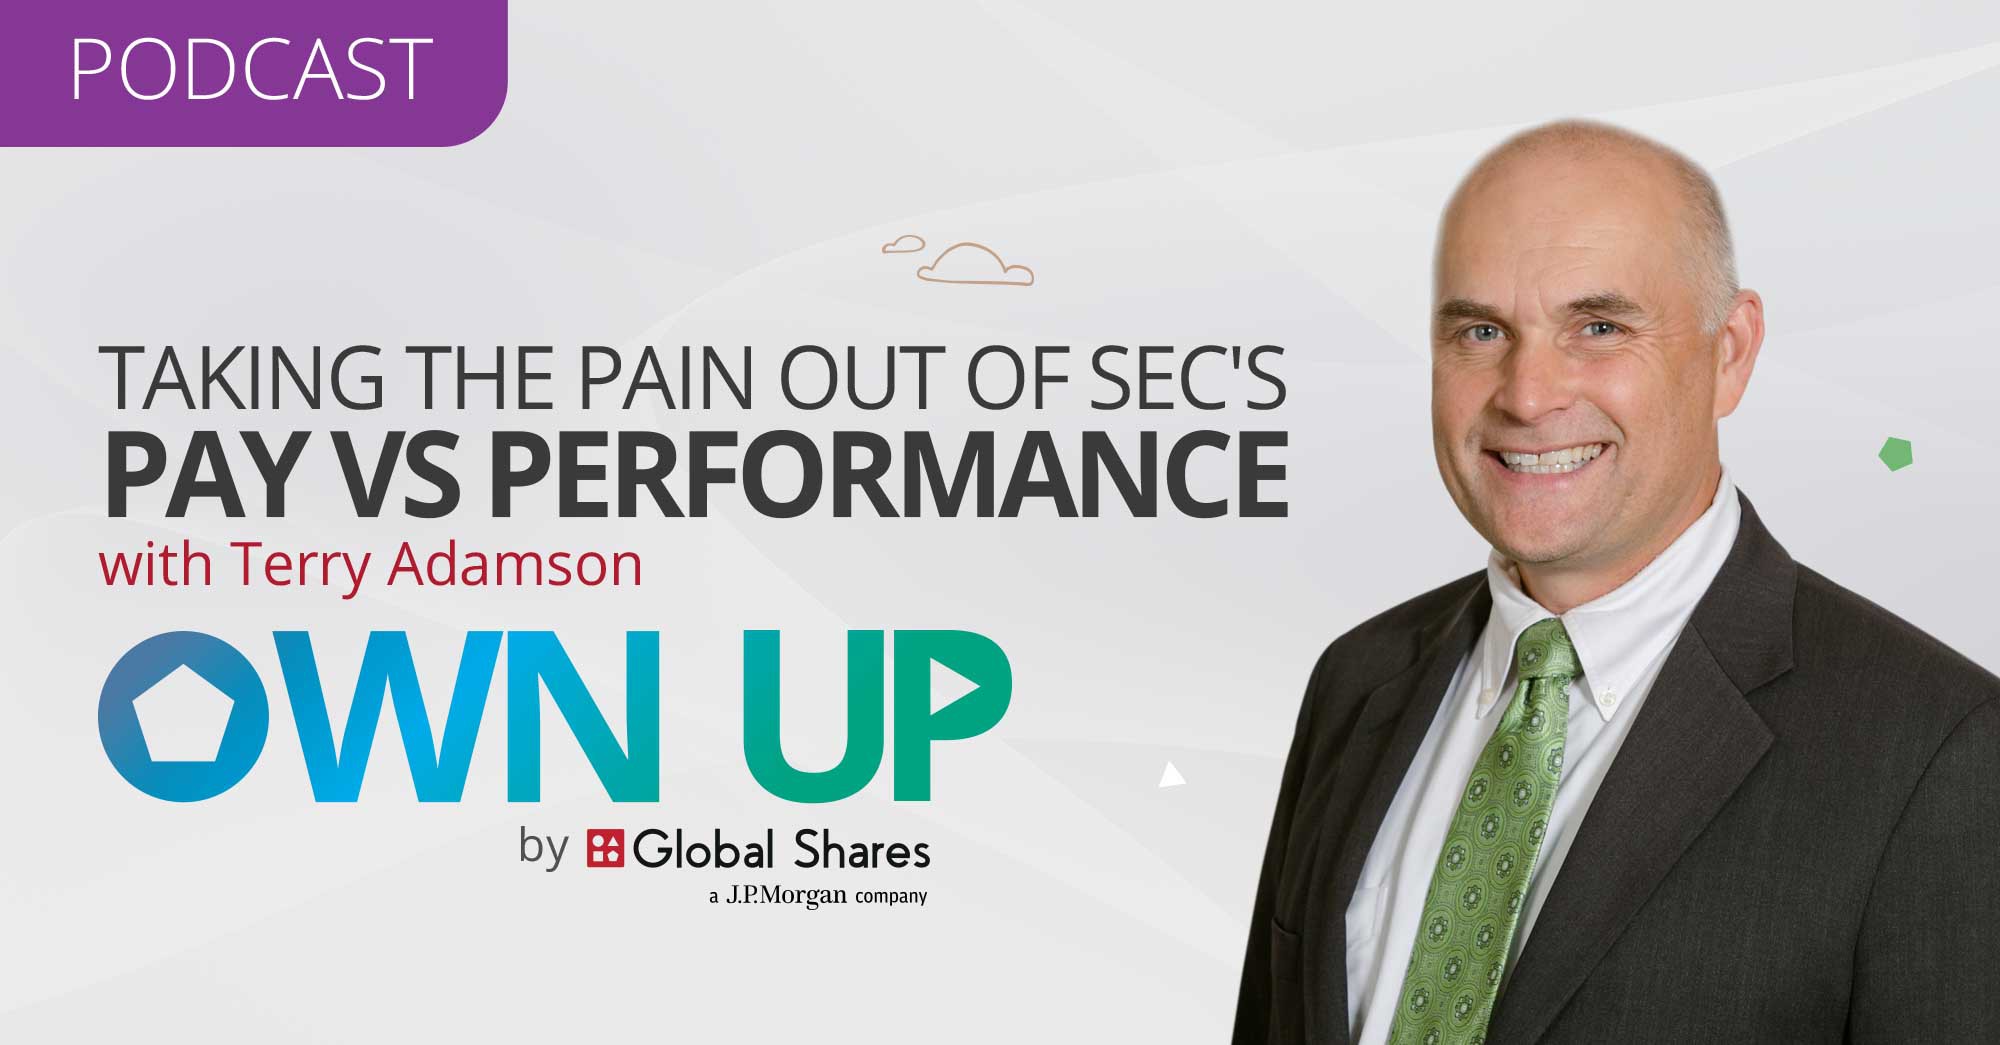 Own Up Podcast: Taking the pain out of SEC’s Pay vs Performance Rule with Terry Adamson